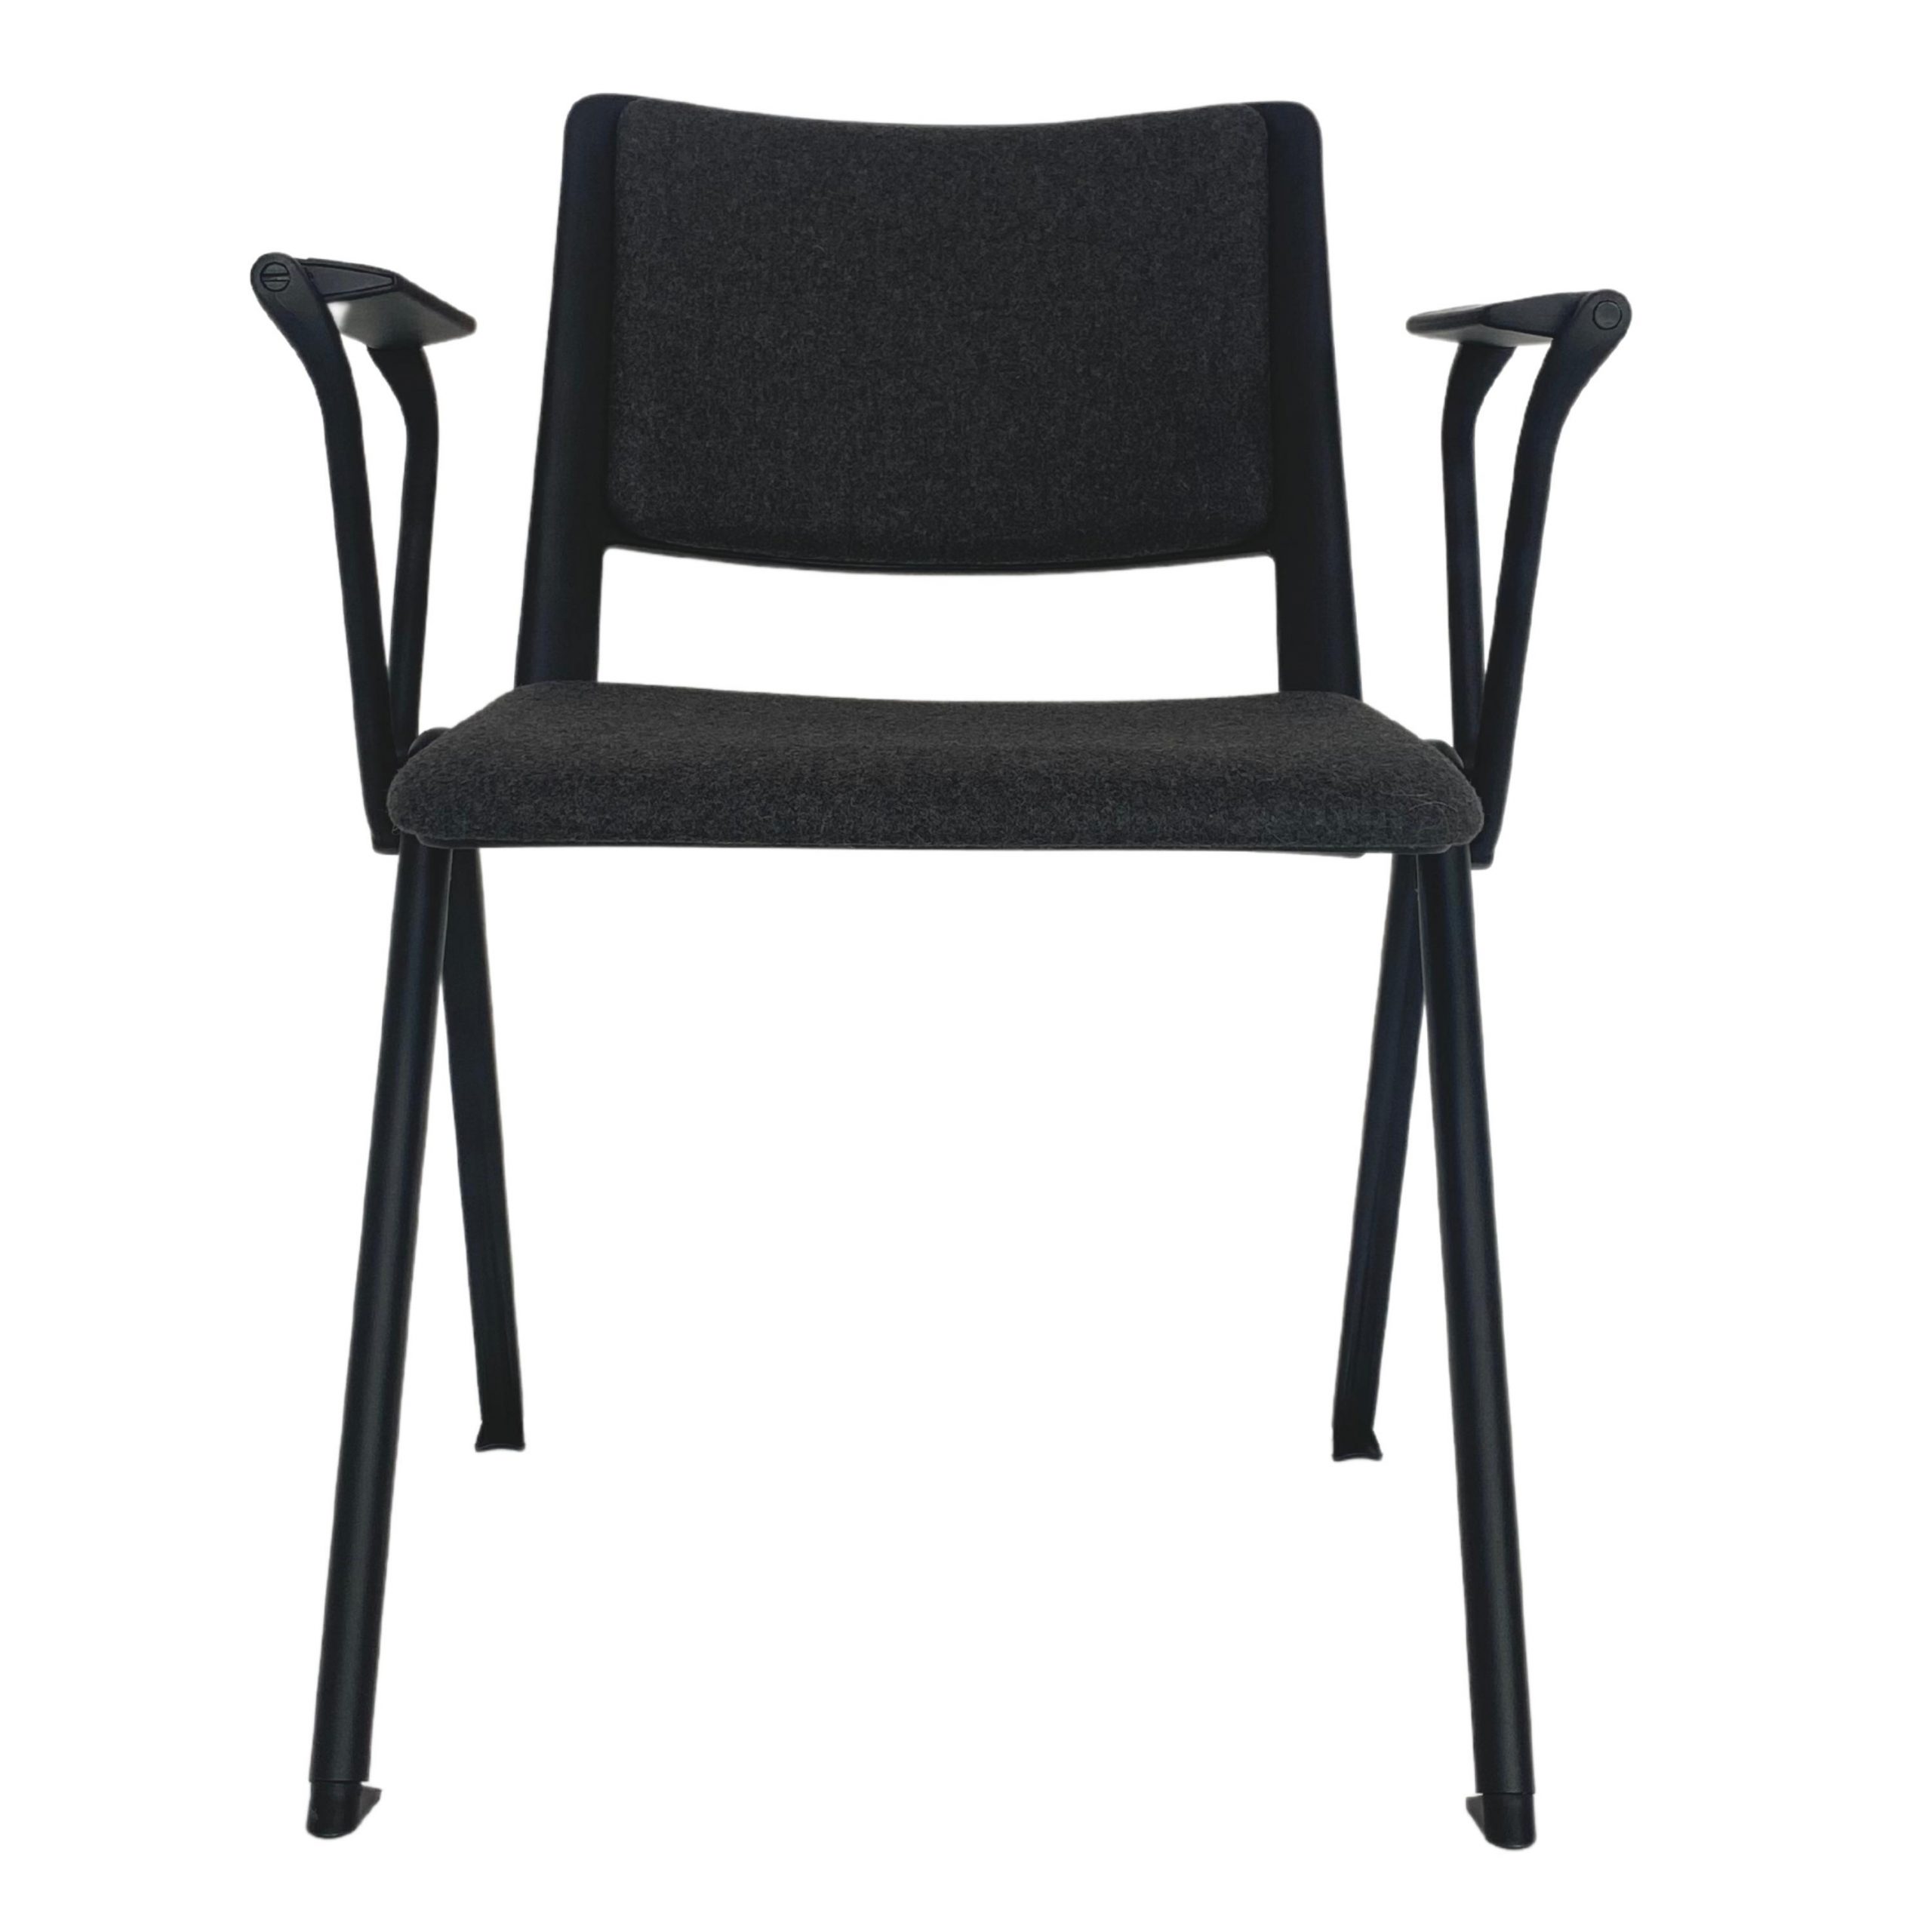 Black | with arms | Fully Upholstered